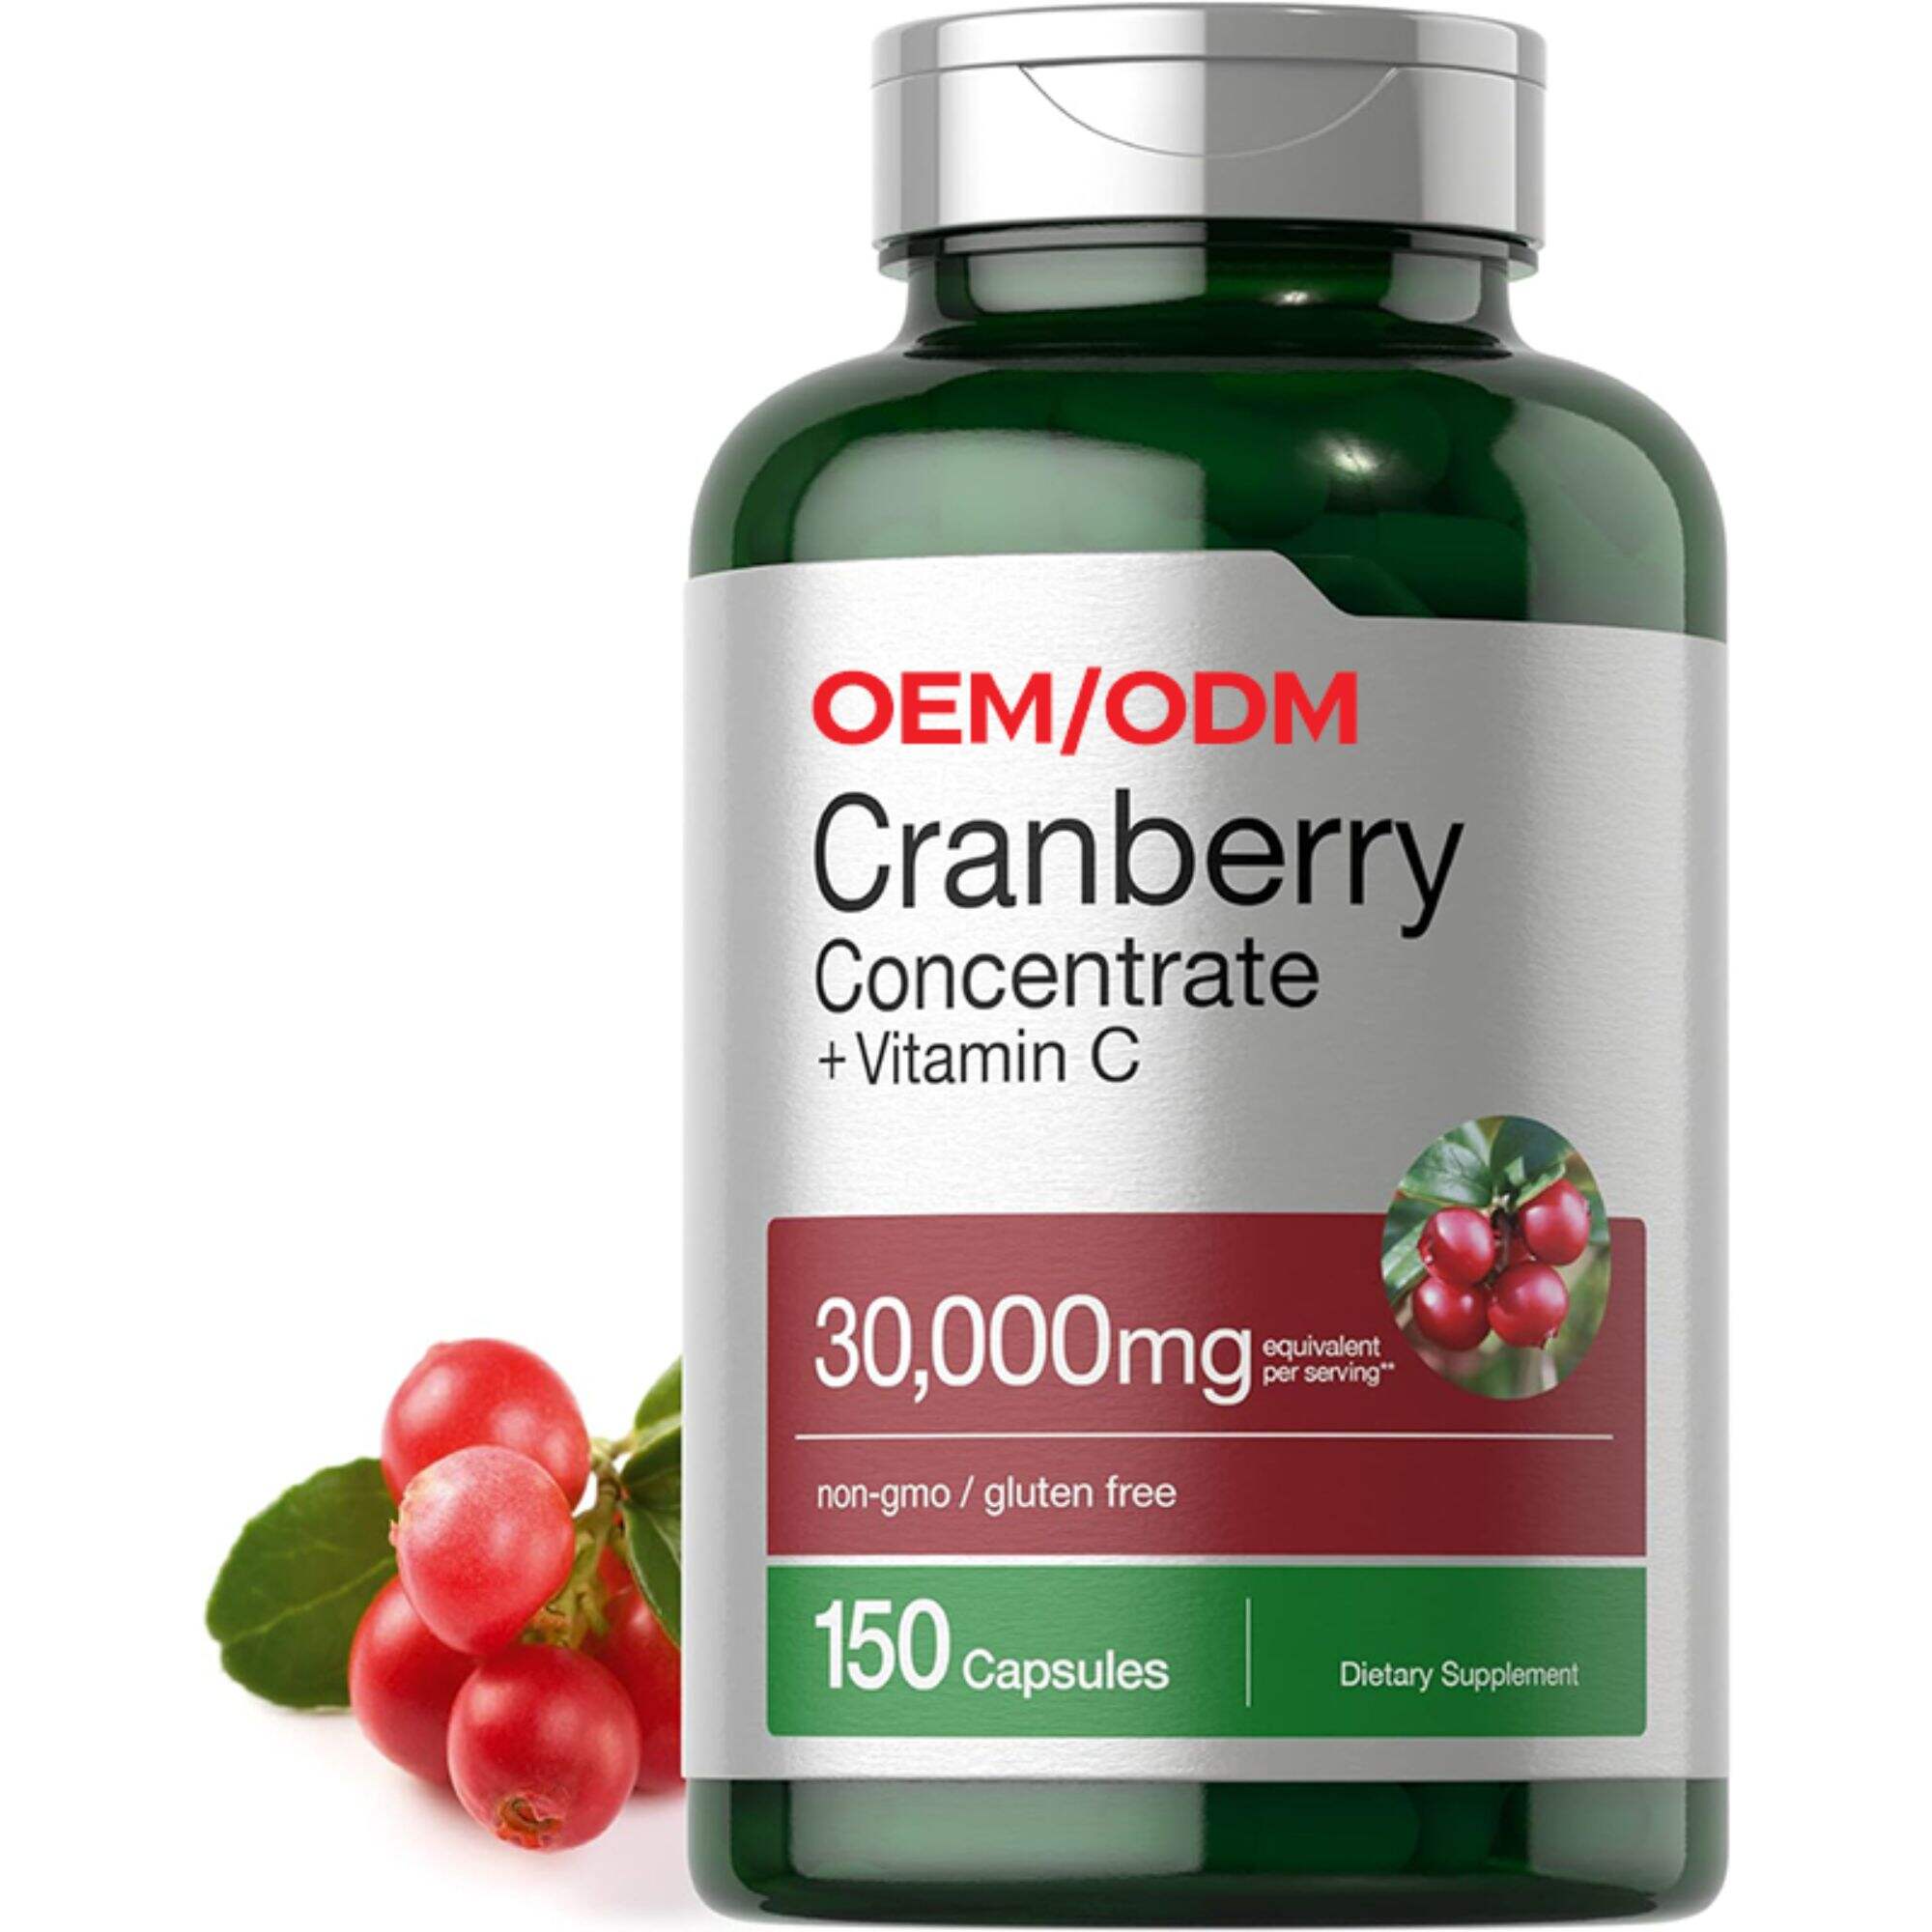 Cranberry Concentrate Extract Pills Vitamin C  150 Capsules Triple Strength Ultimate Potency Formula